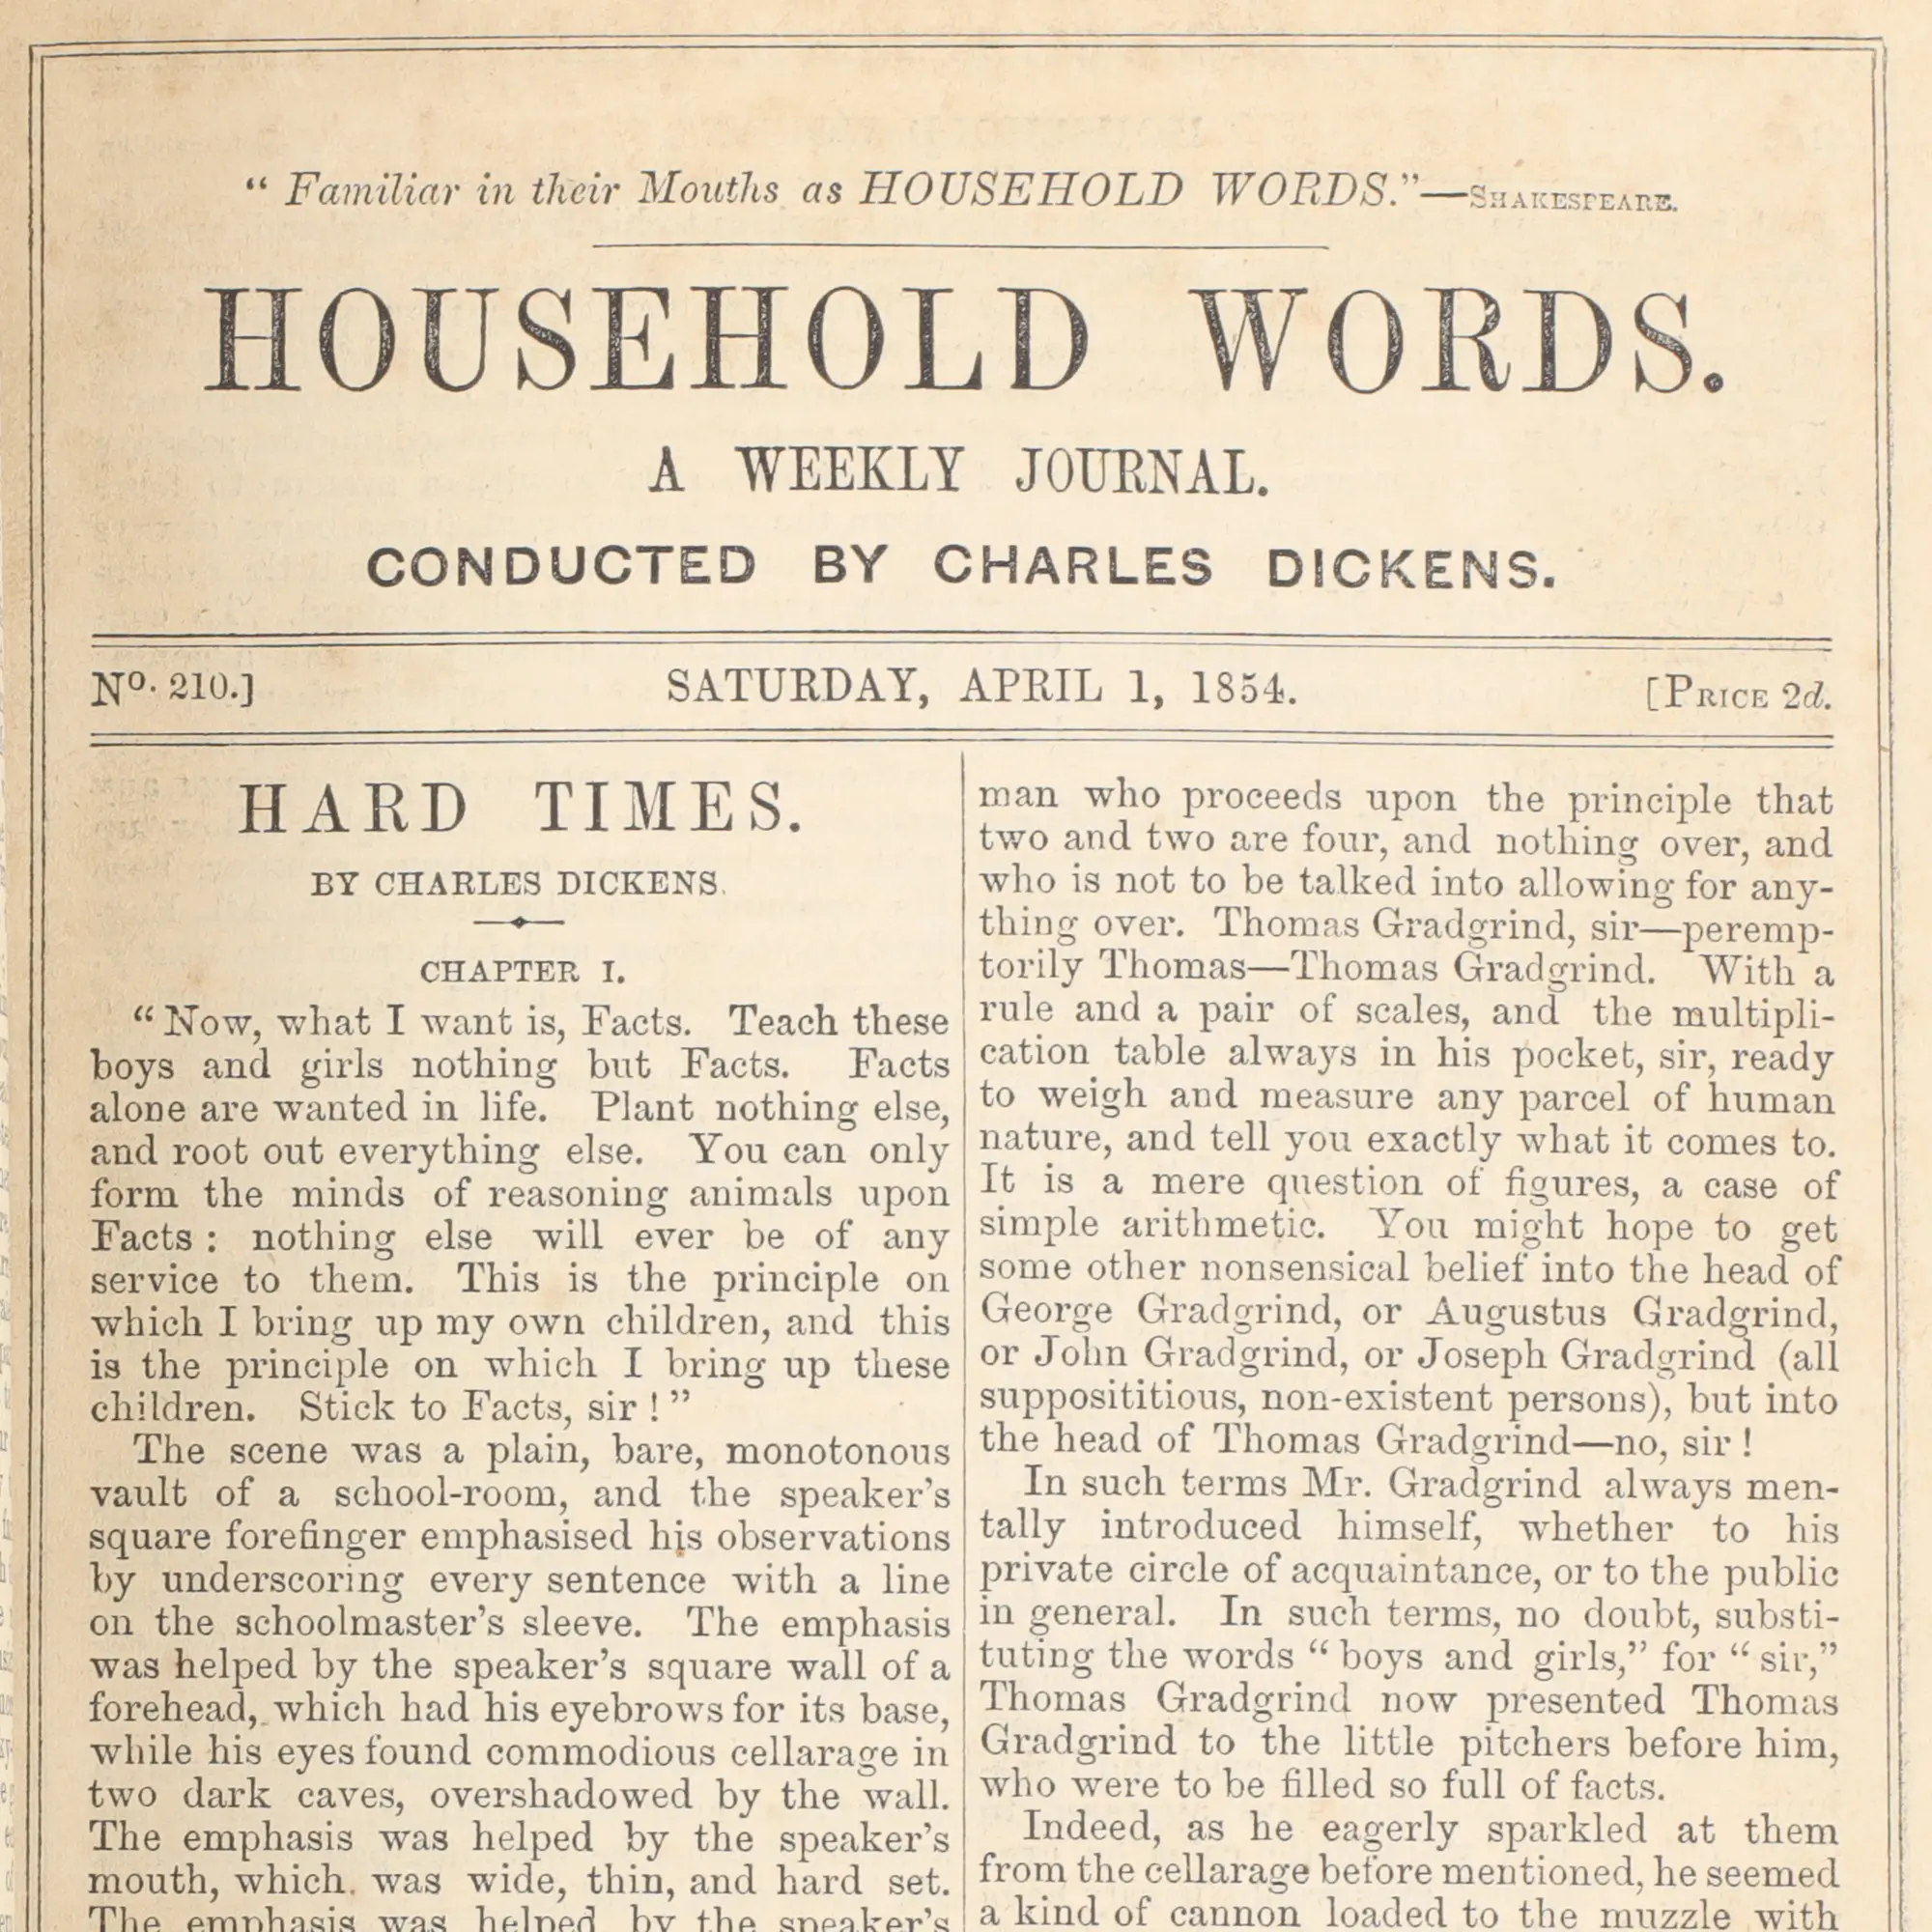 Image of Hard Times appearing in Household Words in 1854